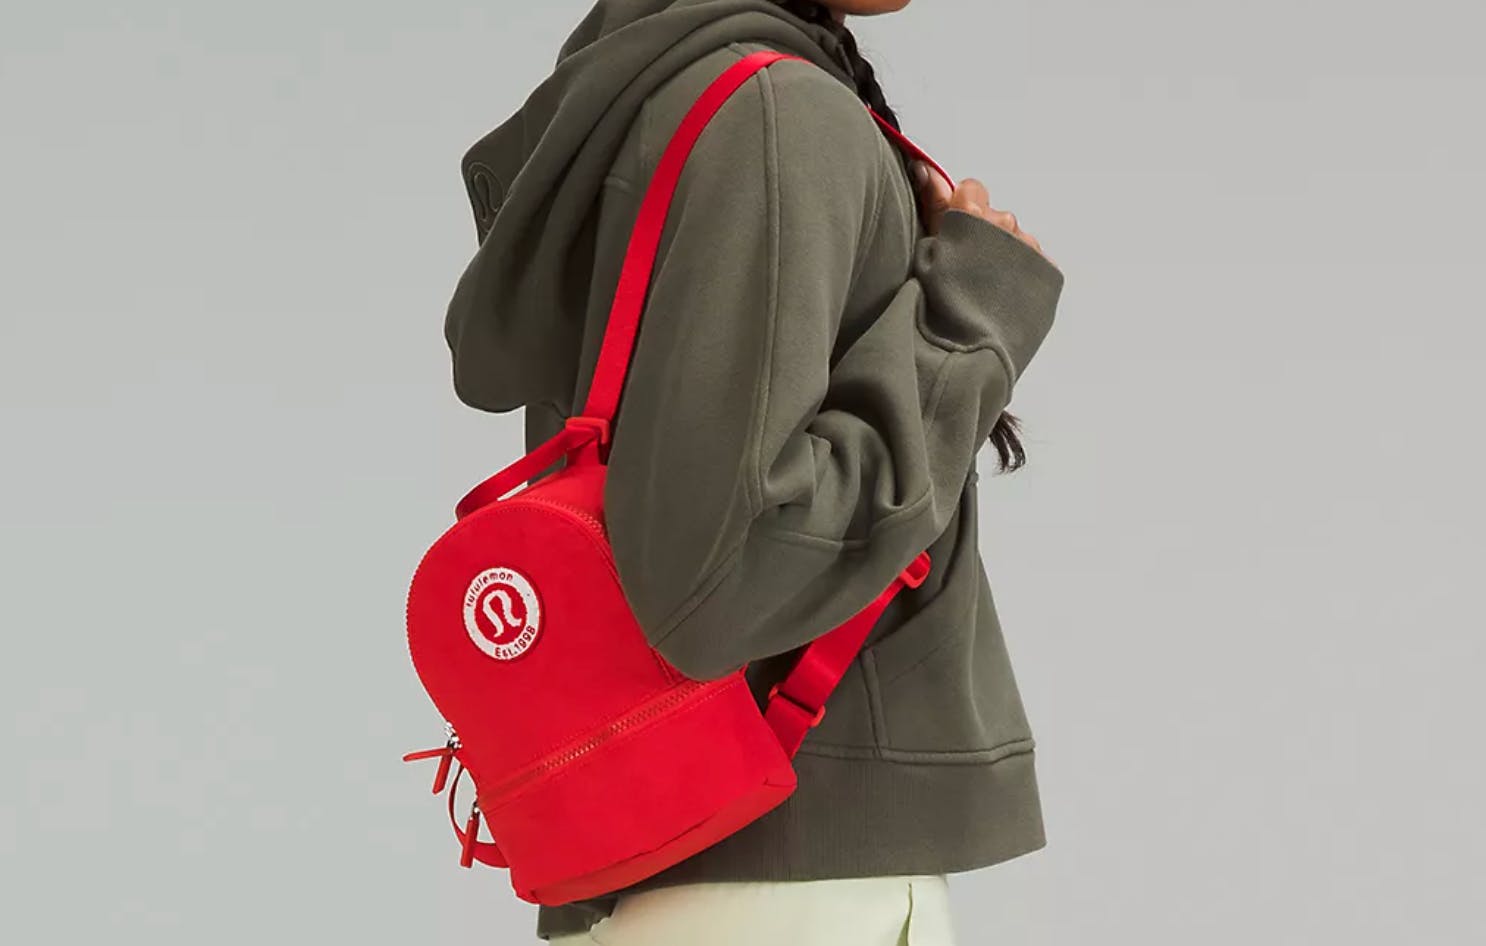 Lululemon-micro-backpack-red-clearance-032723